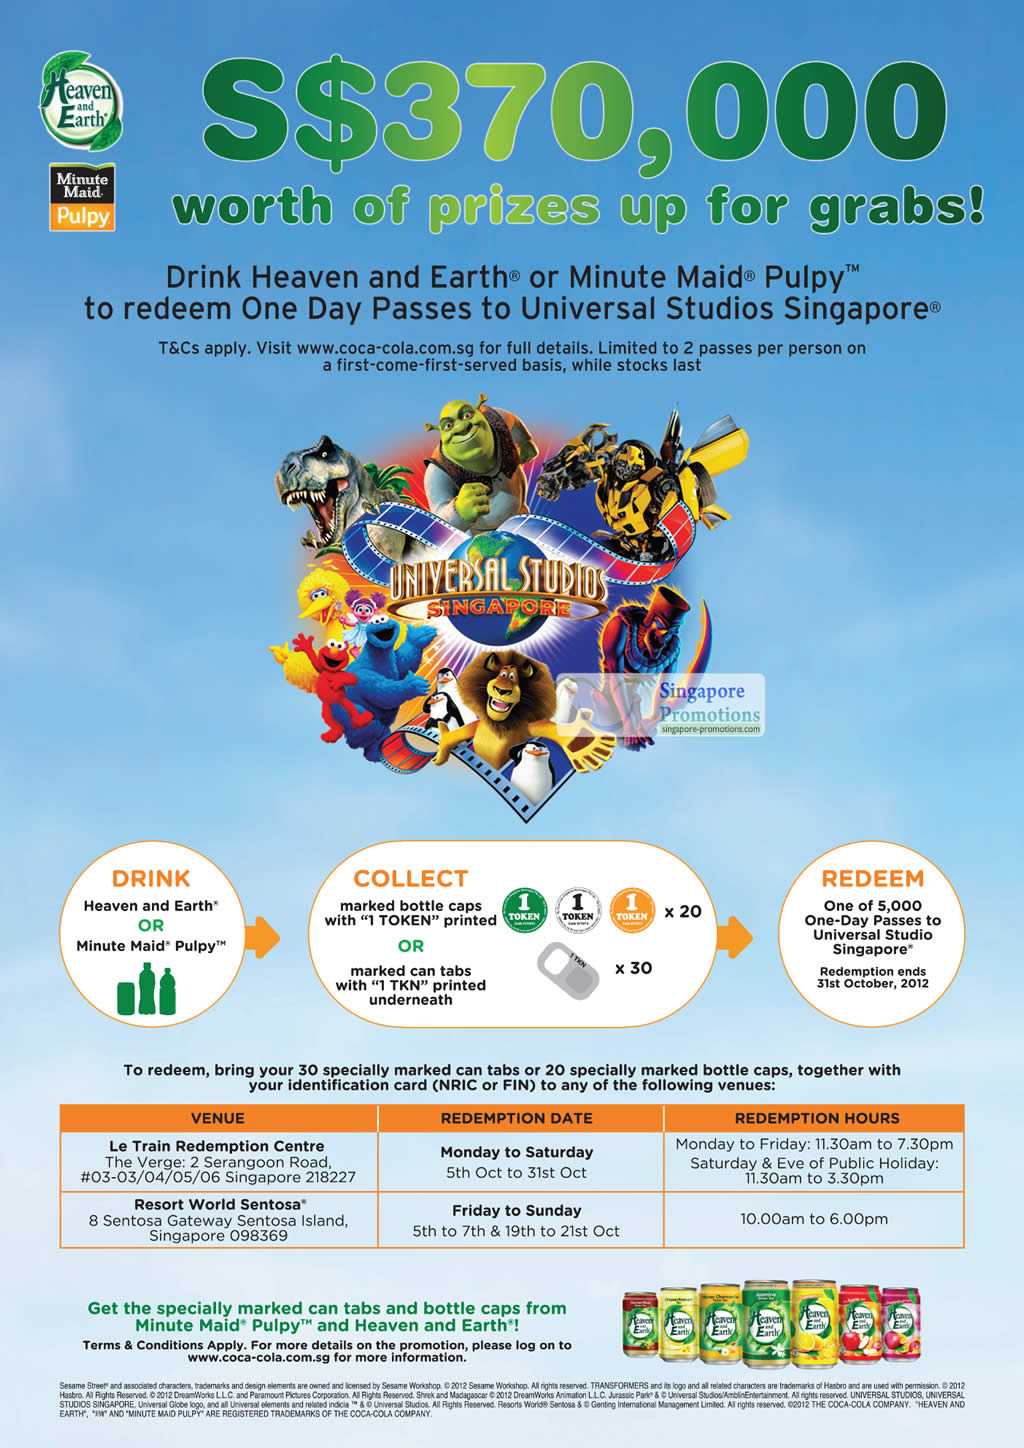 Featured image for Heaven & Earth, Minute Maid Pulpy & Universal Studio Passes Redemption Promotion 1 Sep - 31 Oct 2012